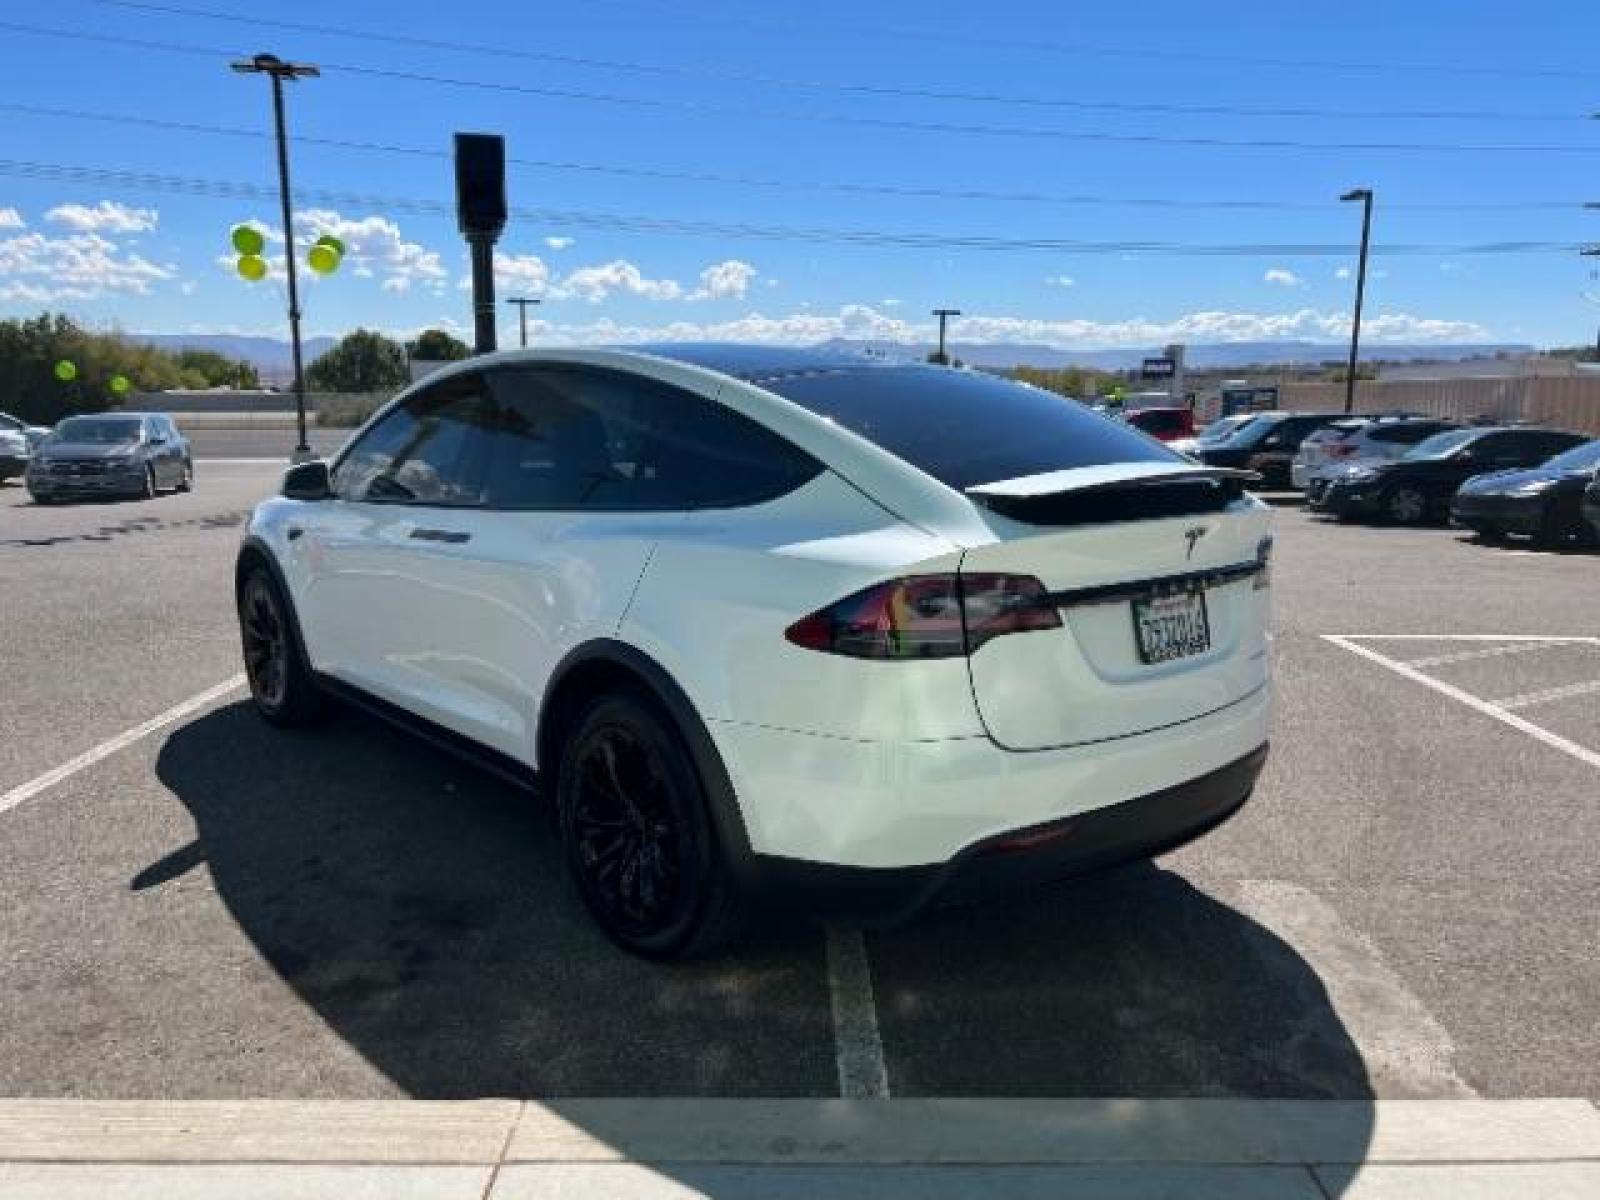 2019 Pearl White Multi-Coat /All Black, leatherette Tesla Model X Standard Range (5YJXCAE21KF) with an ELECTRIC engine, 1-Speed Automatic transmission, located at 1865 East Red Hills Pkwy, St. George, 84770, (435) 628-0023, 37.120850, -113.543640 - AWD, 7 Seats, Autopilot, Raven, Cold weather package, Adaptive suspension, Tow hitch, 2 remotes, FSD computer 3.0 upgrade. Gets 270 miles on a full charge. Black chrome delete vinyl (removeable). This is a beautiful 1 owner MX for way less money and less waiting compared to ordering from Tesla. Bump - Photo #6